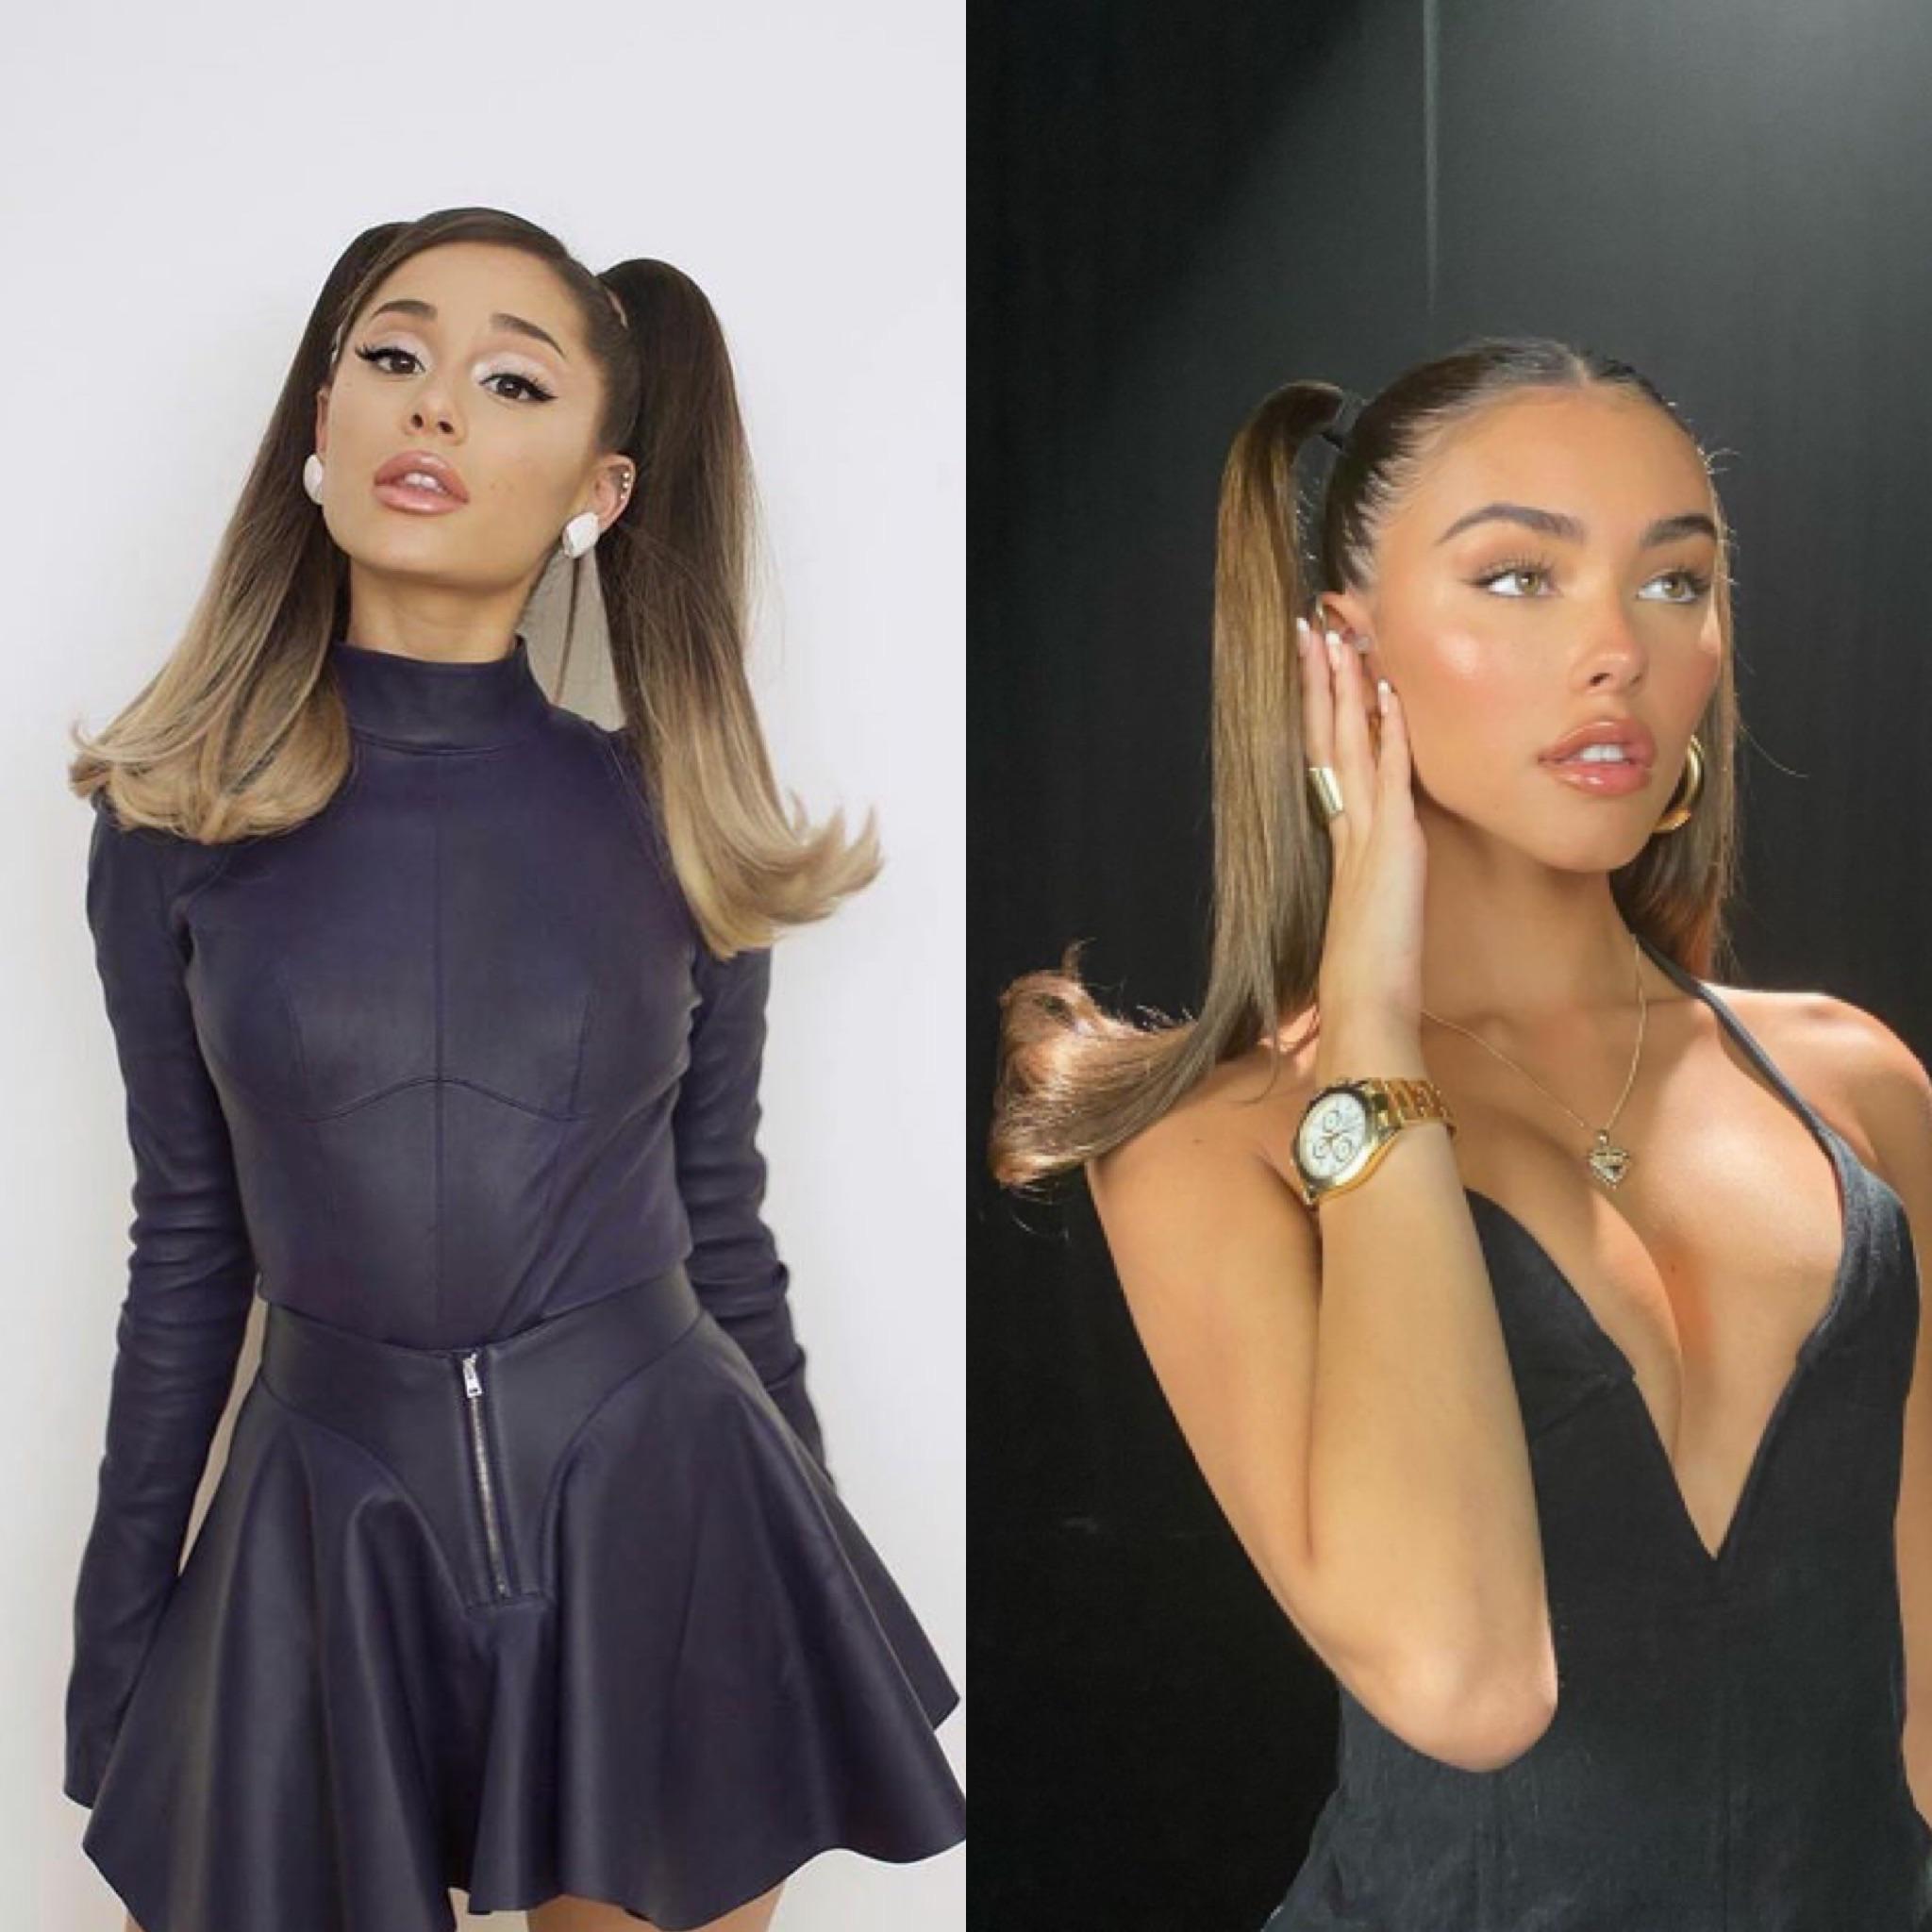 Ariana grande or Madison beer Which one should i dump